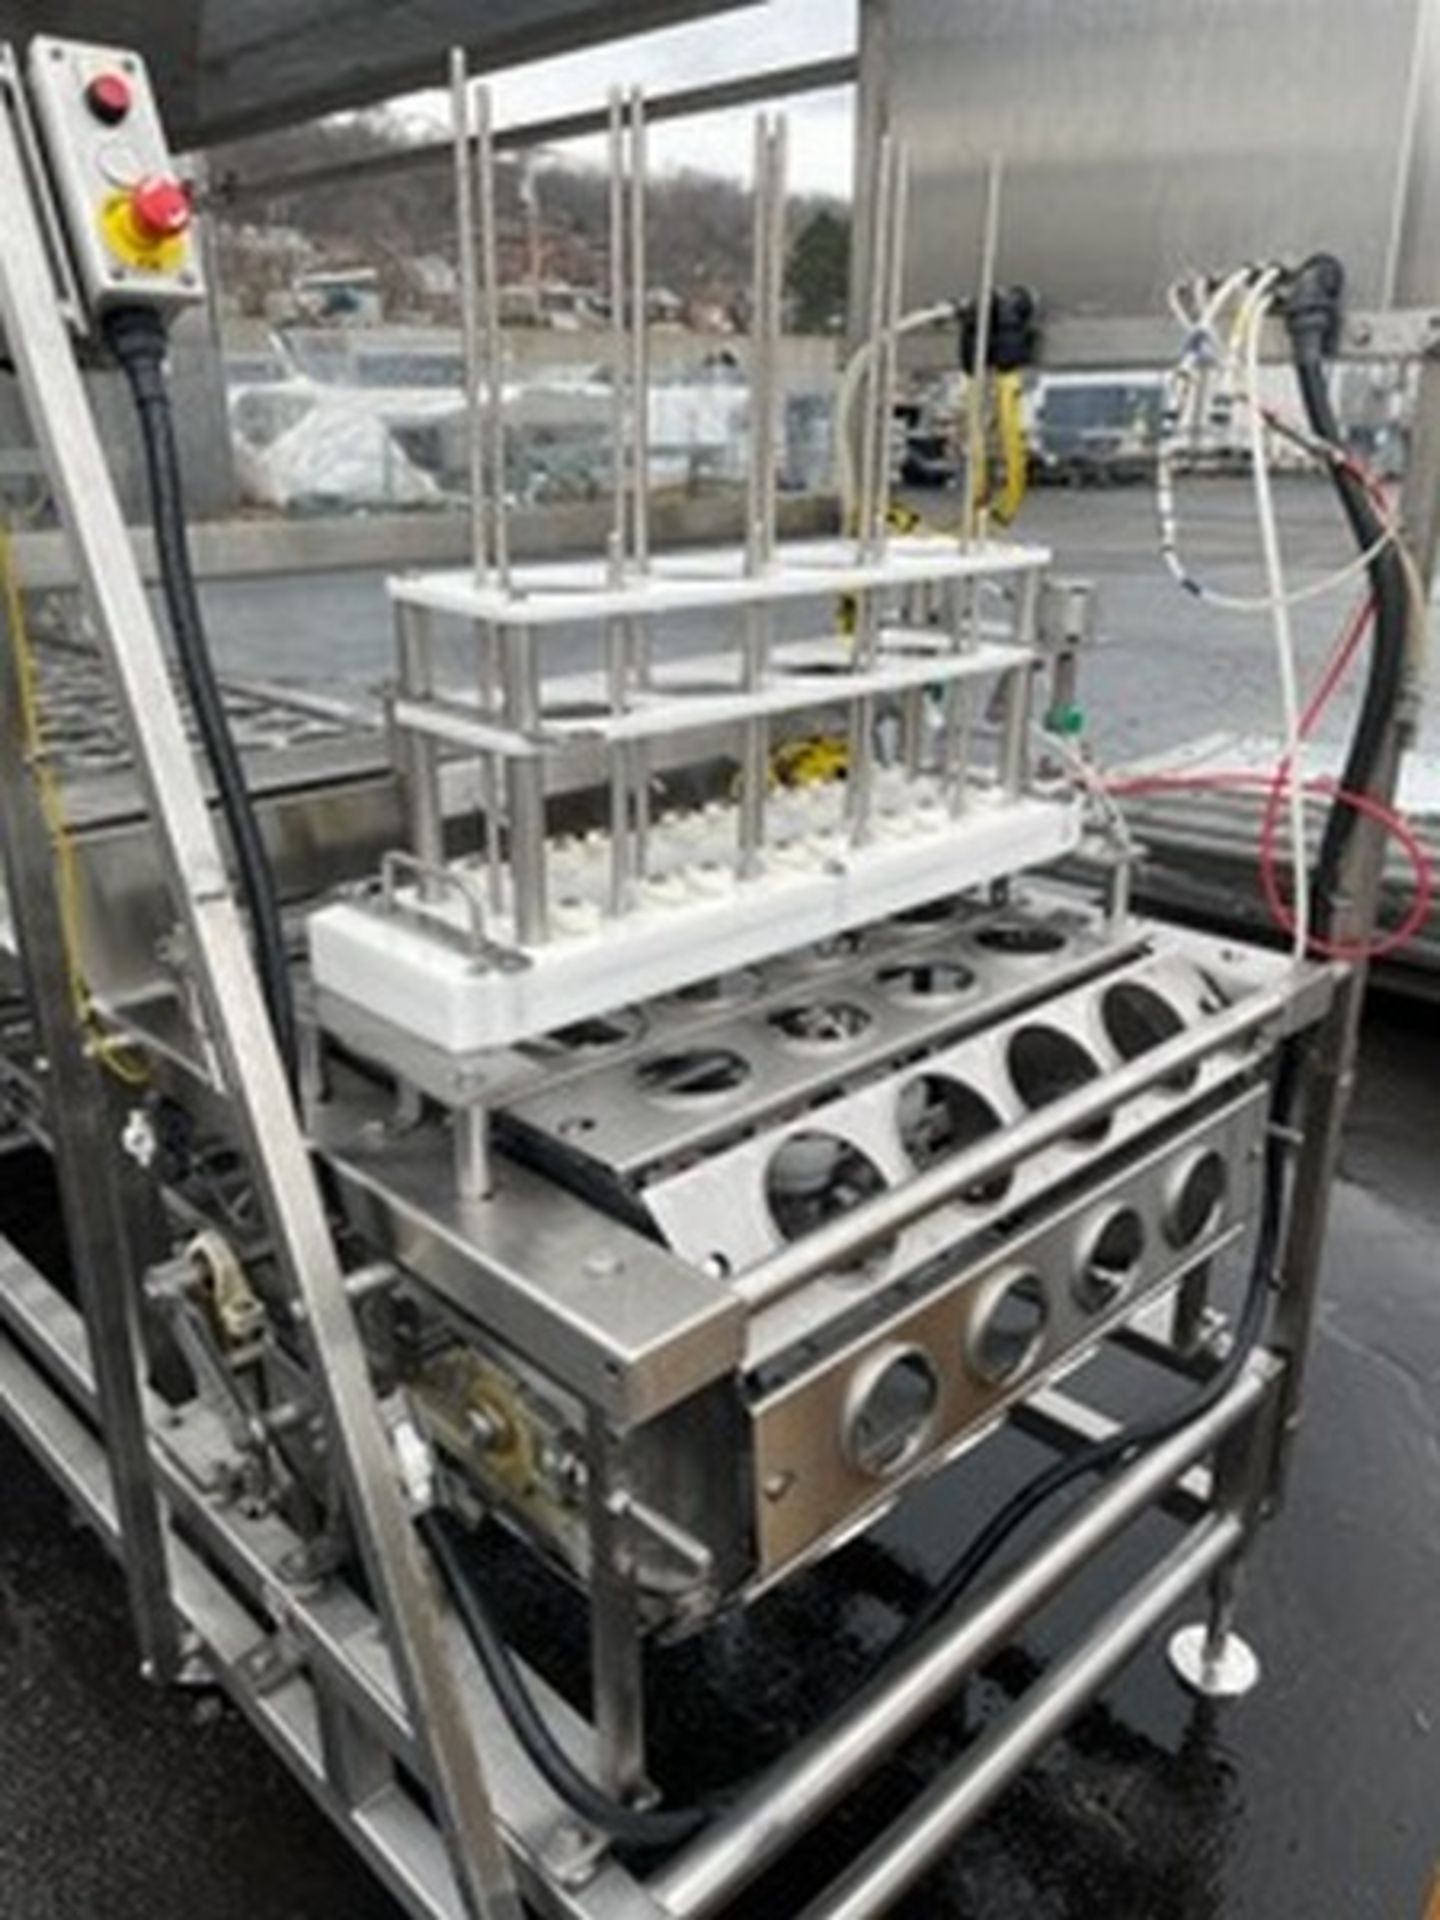 Osgood 4-Lane In-Line S/S Cup Filler,M/N 4800-E, S/N 351-840, Set Up with 3-5/8" W On-Board Change - Image 8 of 18